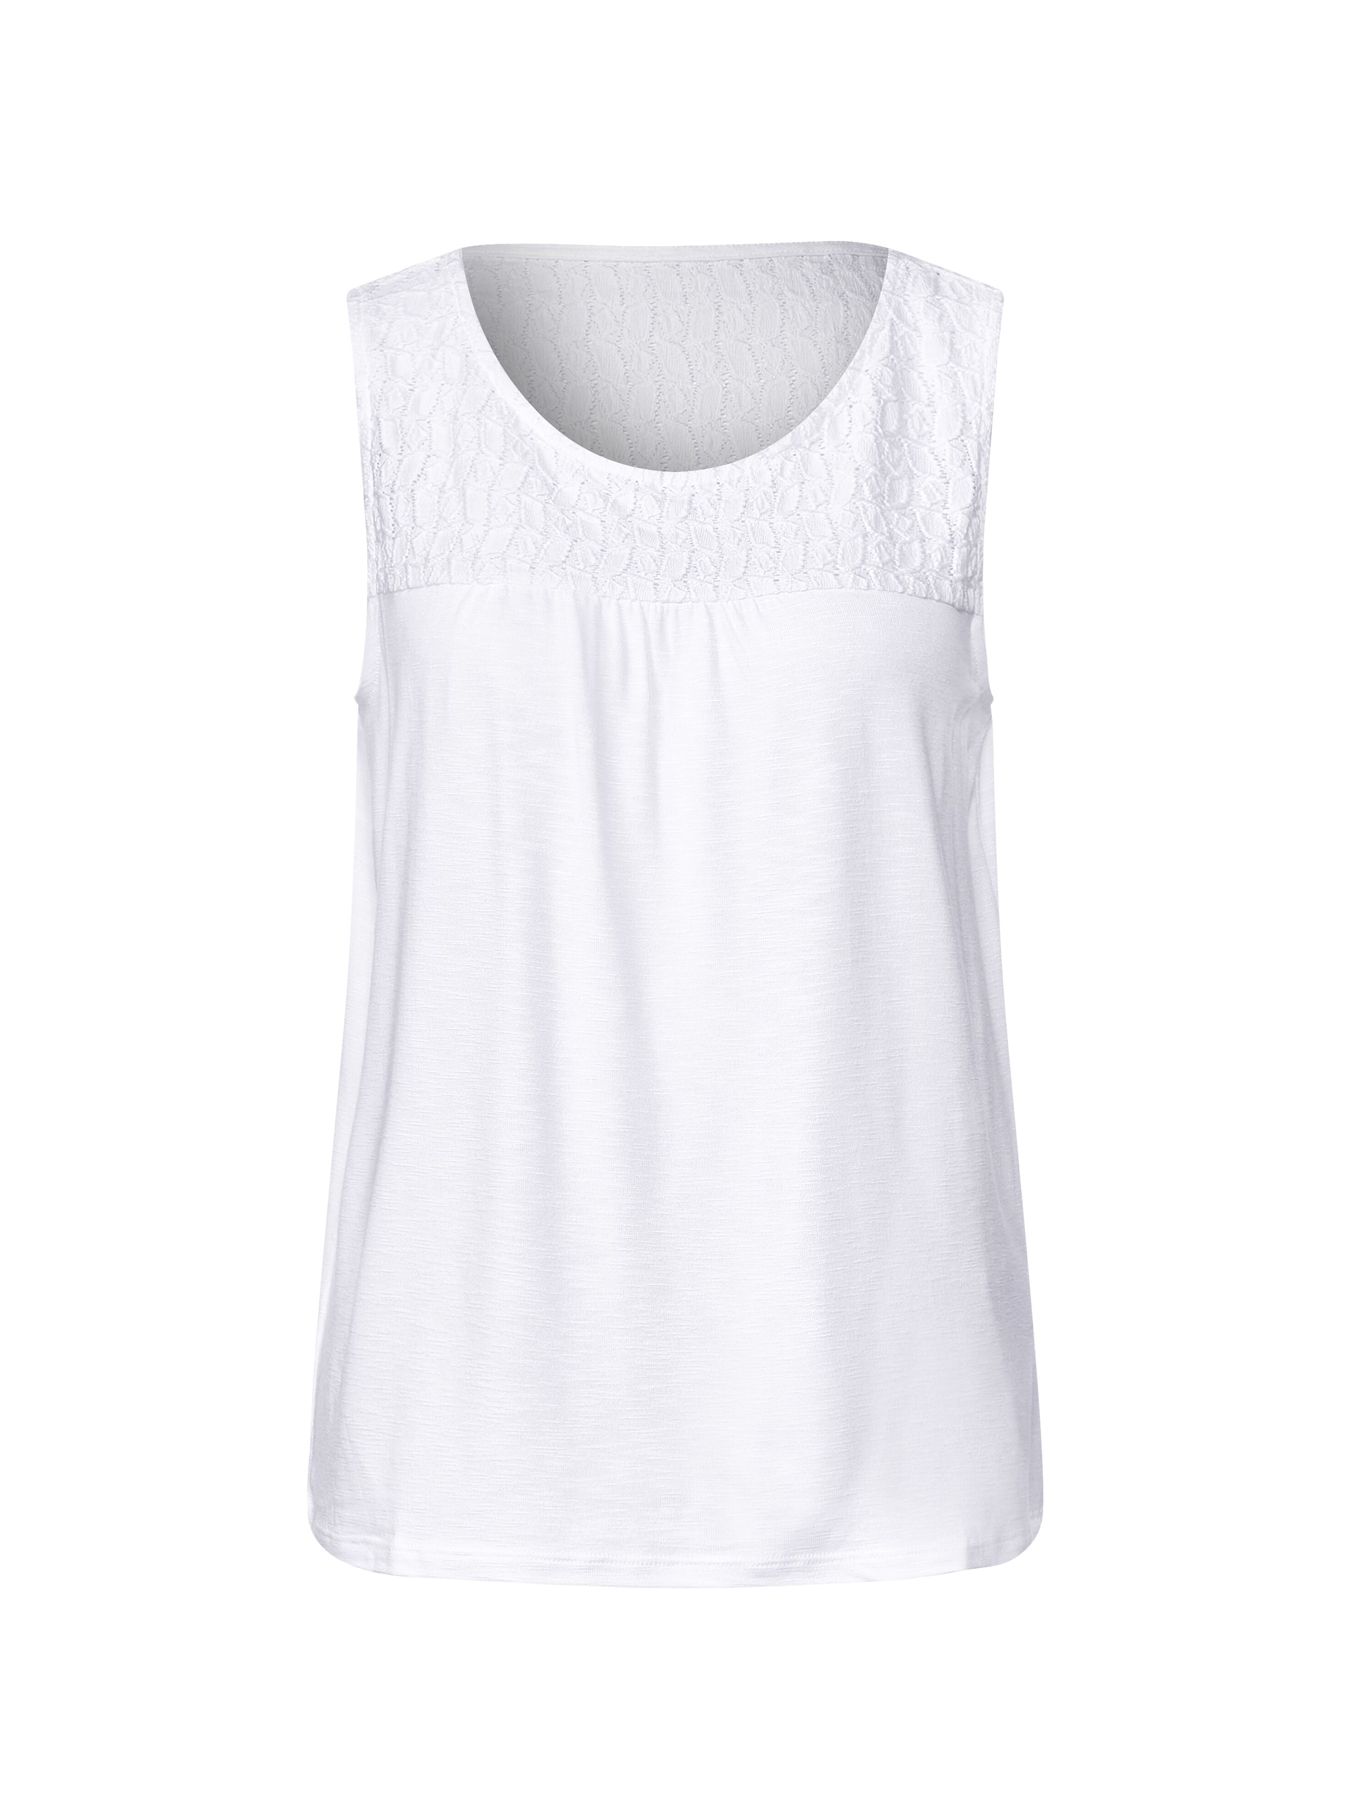 Street-One top w.lace white 2900137403027